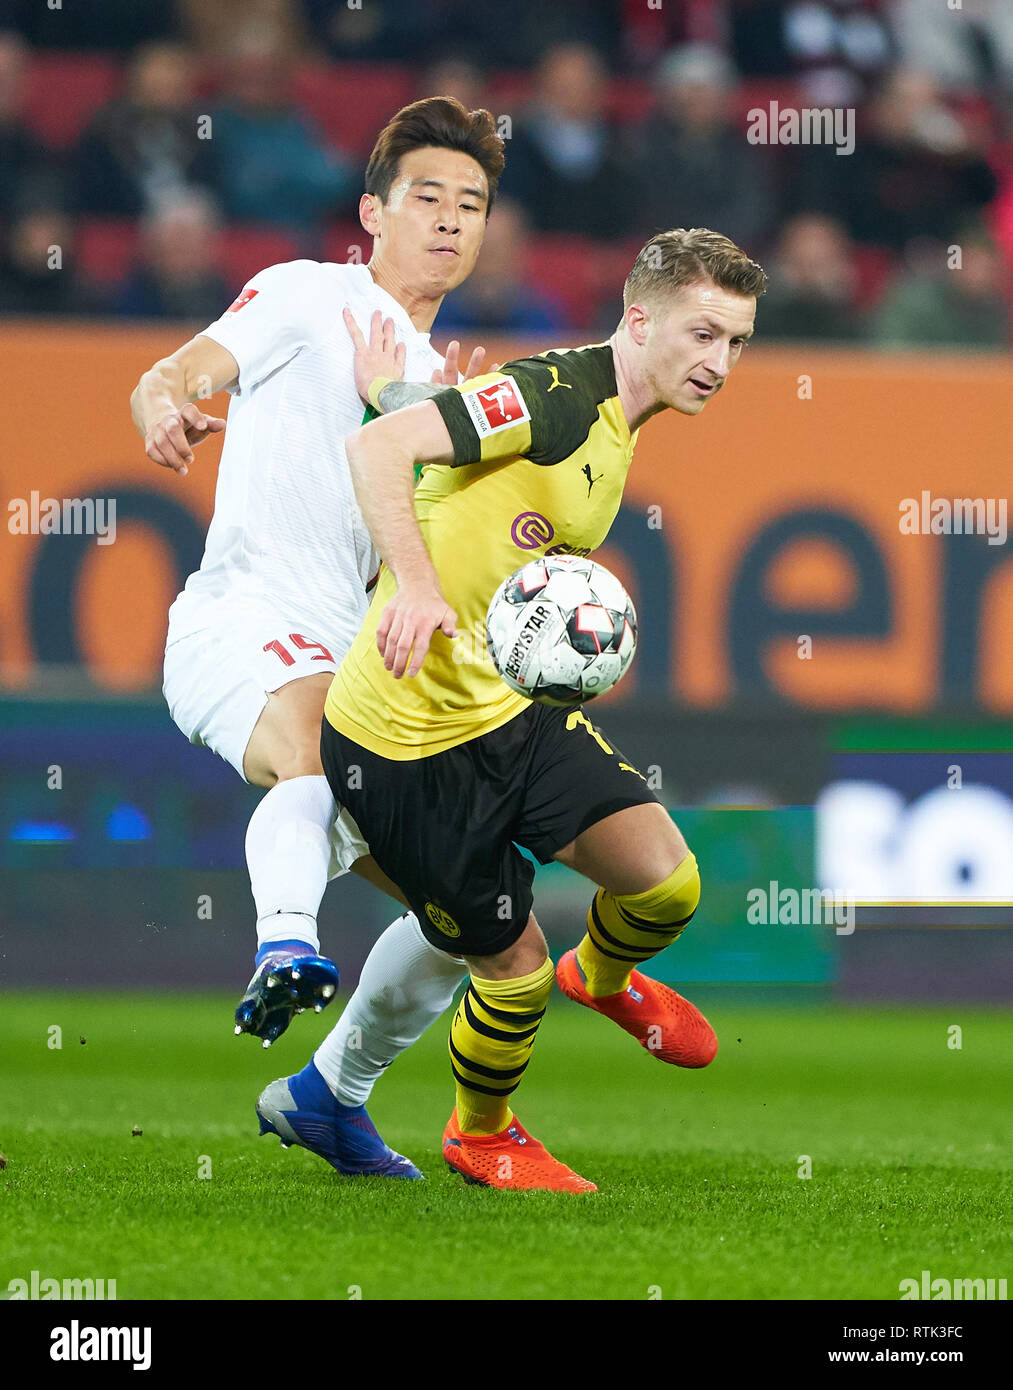 Augsburg, Germany. 01st Mar, 2019. Marco REUS, BVB 11 compete for the ball, tackling, duel, header, action, fight against Ja-Cheol KOO, FCA 19 FC AUGSBURG - BORUSSIA DORTMUND - DFL REGULATIONS PROHIBIT ANY USE OF PHOTOGRAPHS as IMAGE SEQUENCES and/or QUASI-VIDEO - 1.German Soccer League, Augsburg, March 1, 2019 Season 2018/2019, matchday 24, BVB, Bavaria Credit: Peter Schatz/Alamy Live News Stock Photo